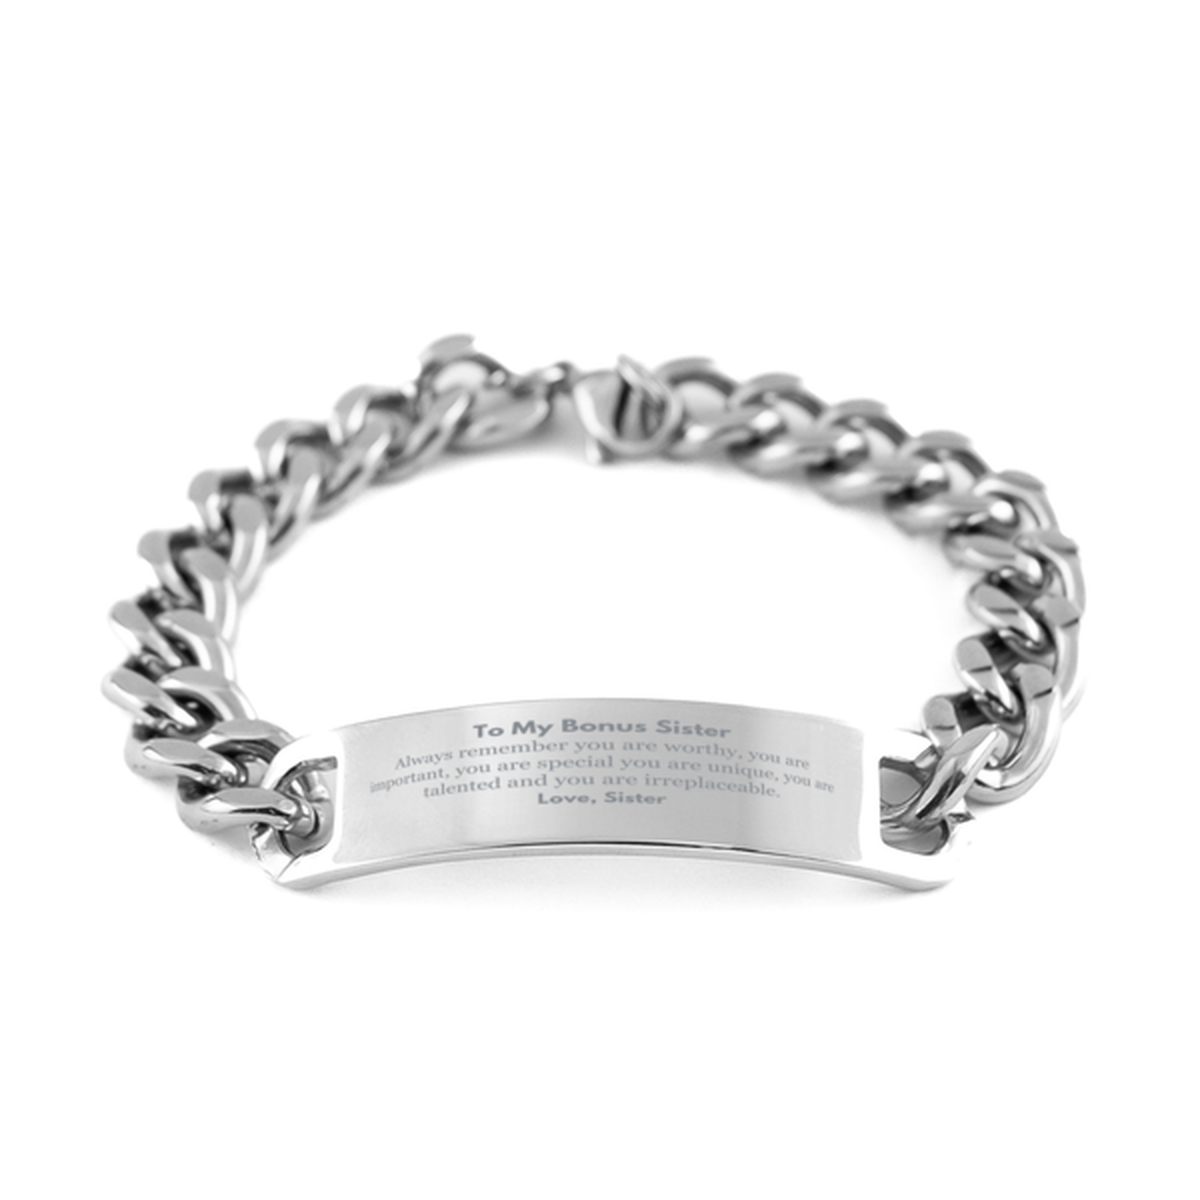 Bonus Sister Birthday Gifts from Sister, Inspirational Cuban Chain Stainless Steel Bracelet for Bonus Sister Christmas Graduation Gifts for Bonus Sister Always remember you are worthy, you are important. Love, Sister